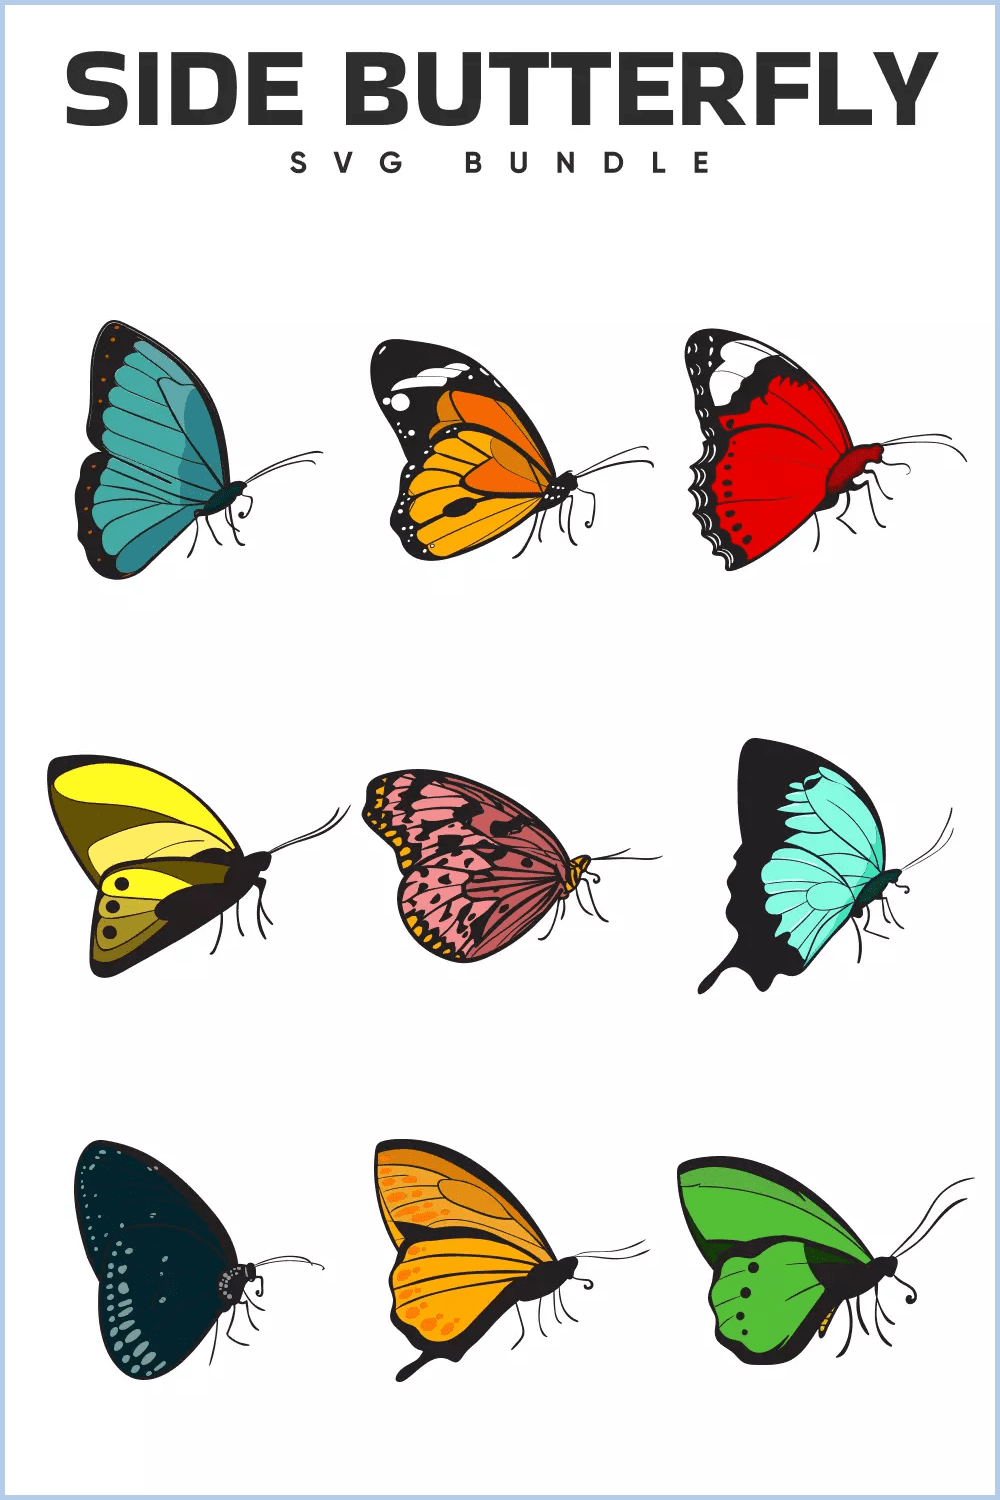 Collage of images of colored butterflies on the side.